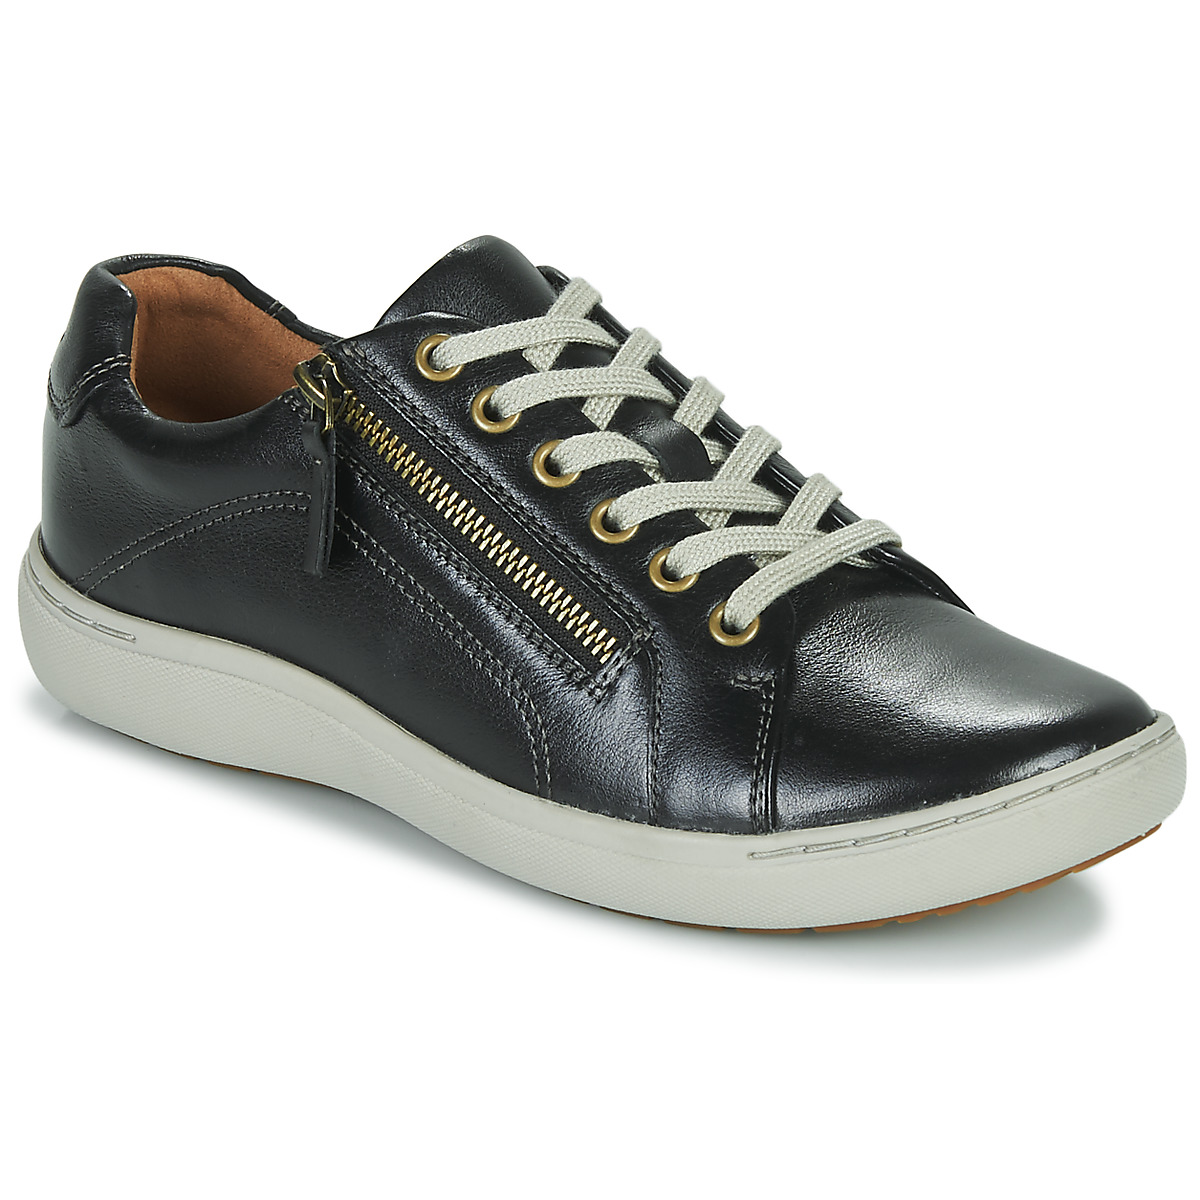 Xαμηλά Sneakers Clarks Nalle Lace